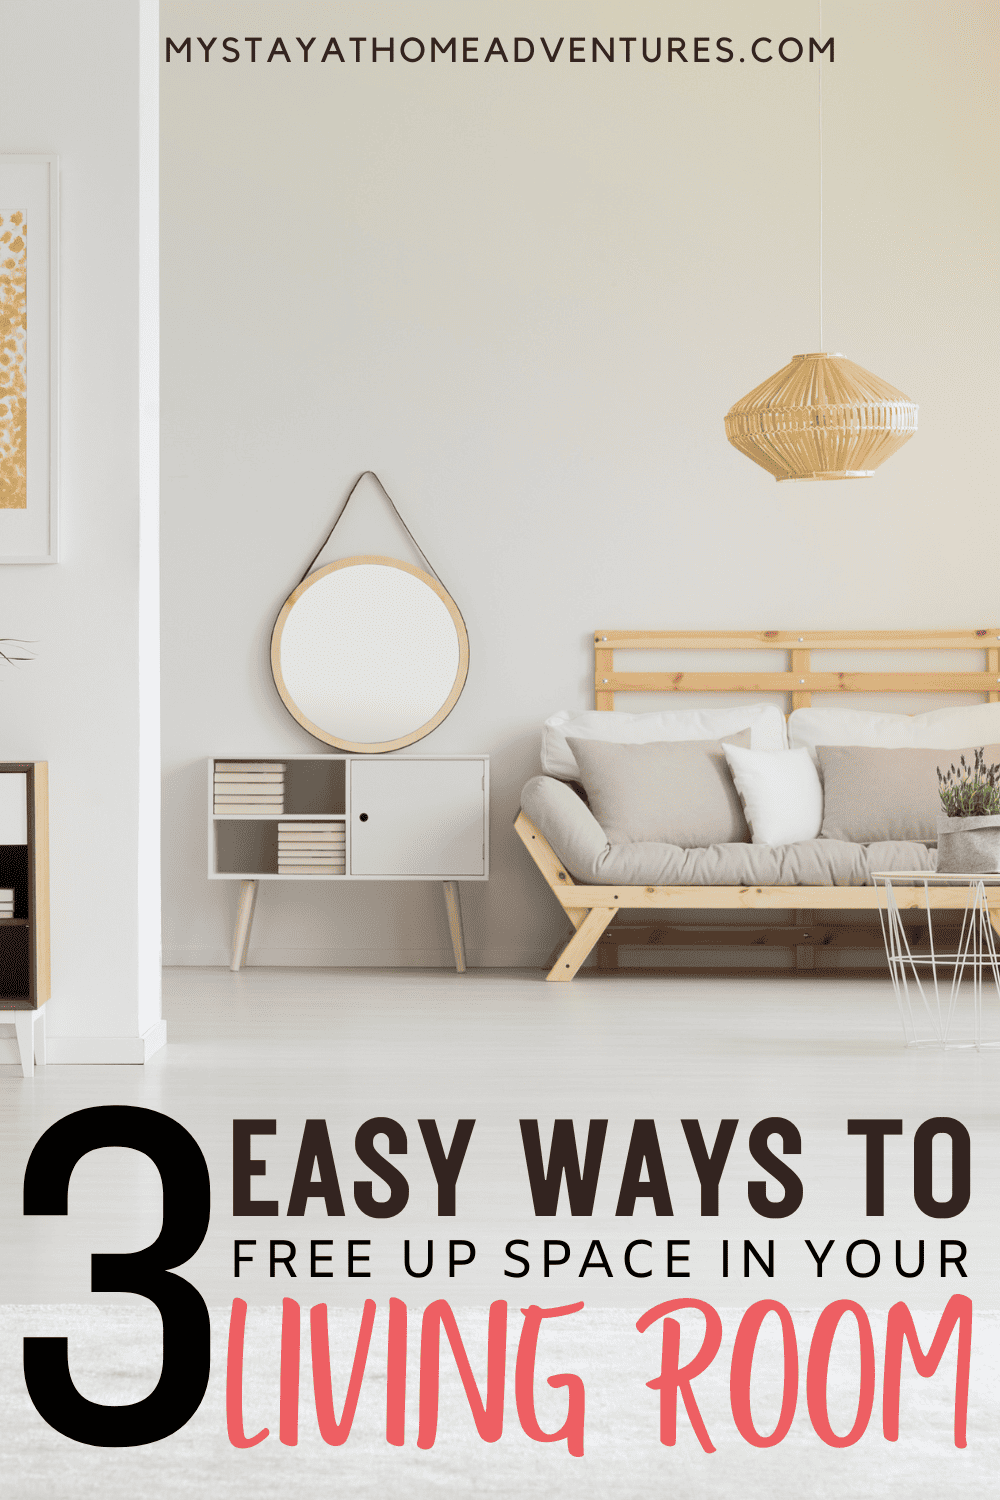 3 Easy Ways To Free Up Space In Your Living Room * My Stay At Home ...